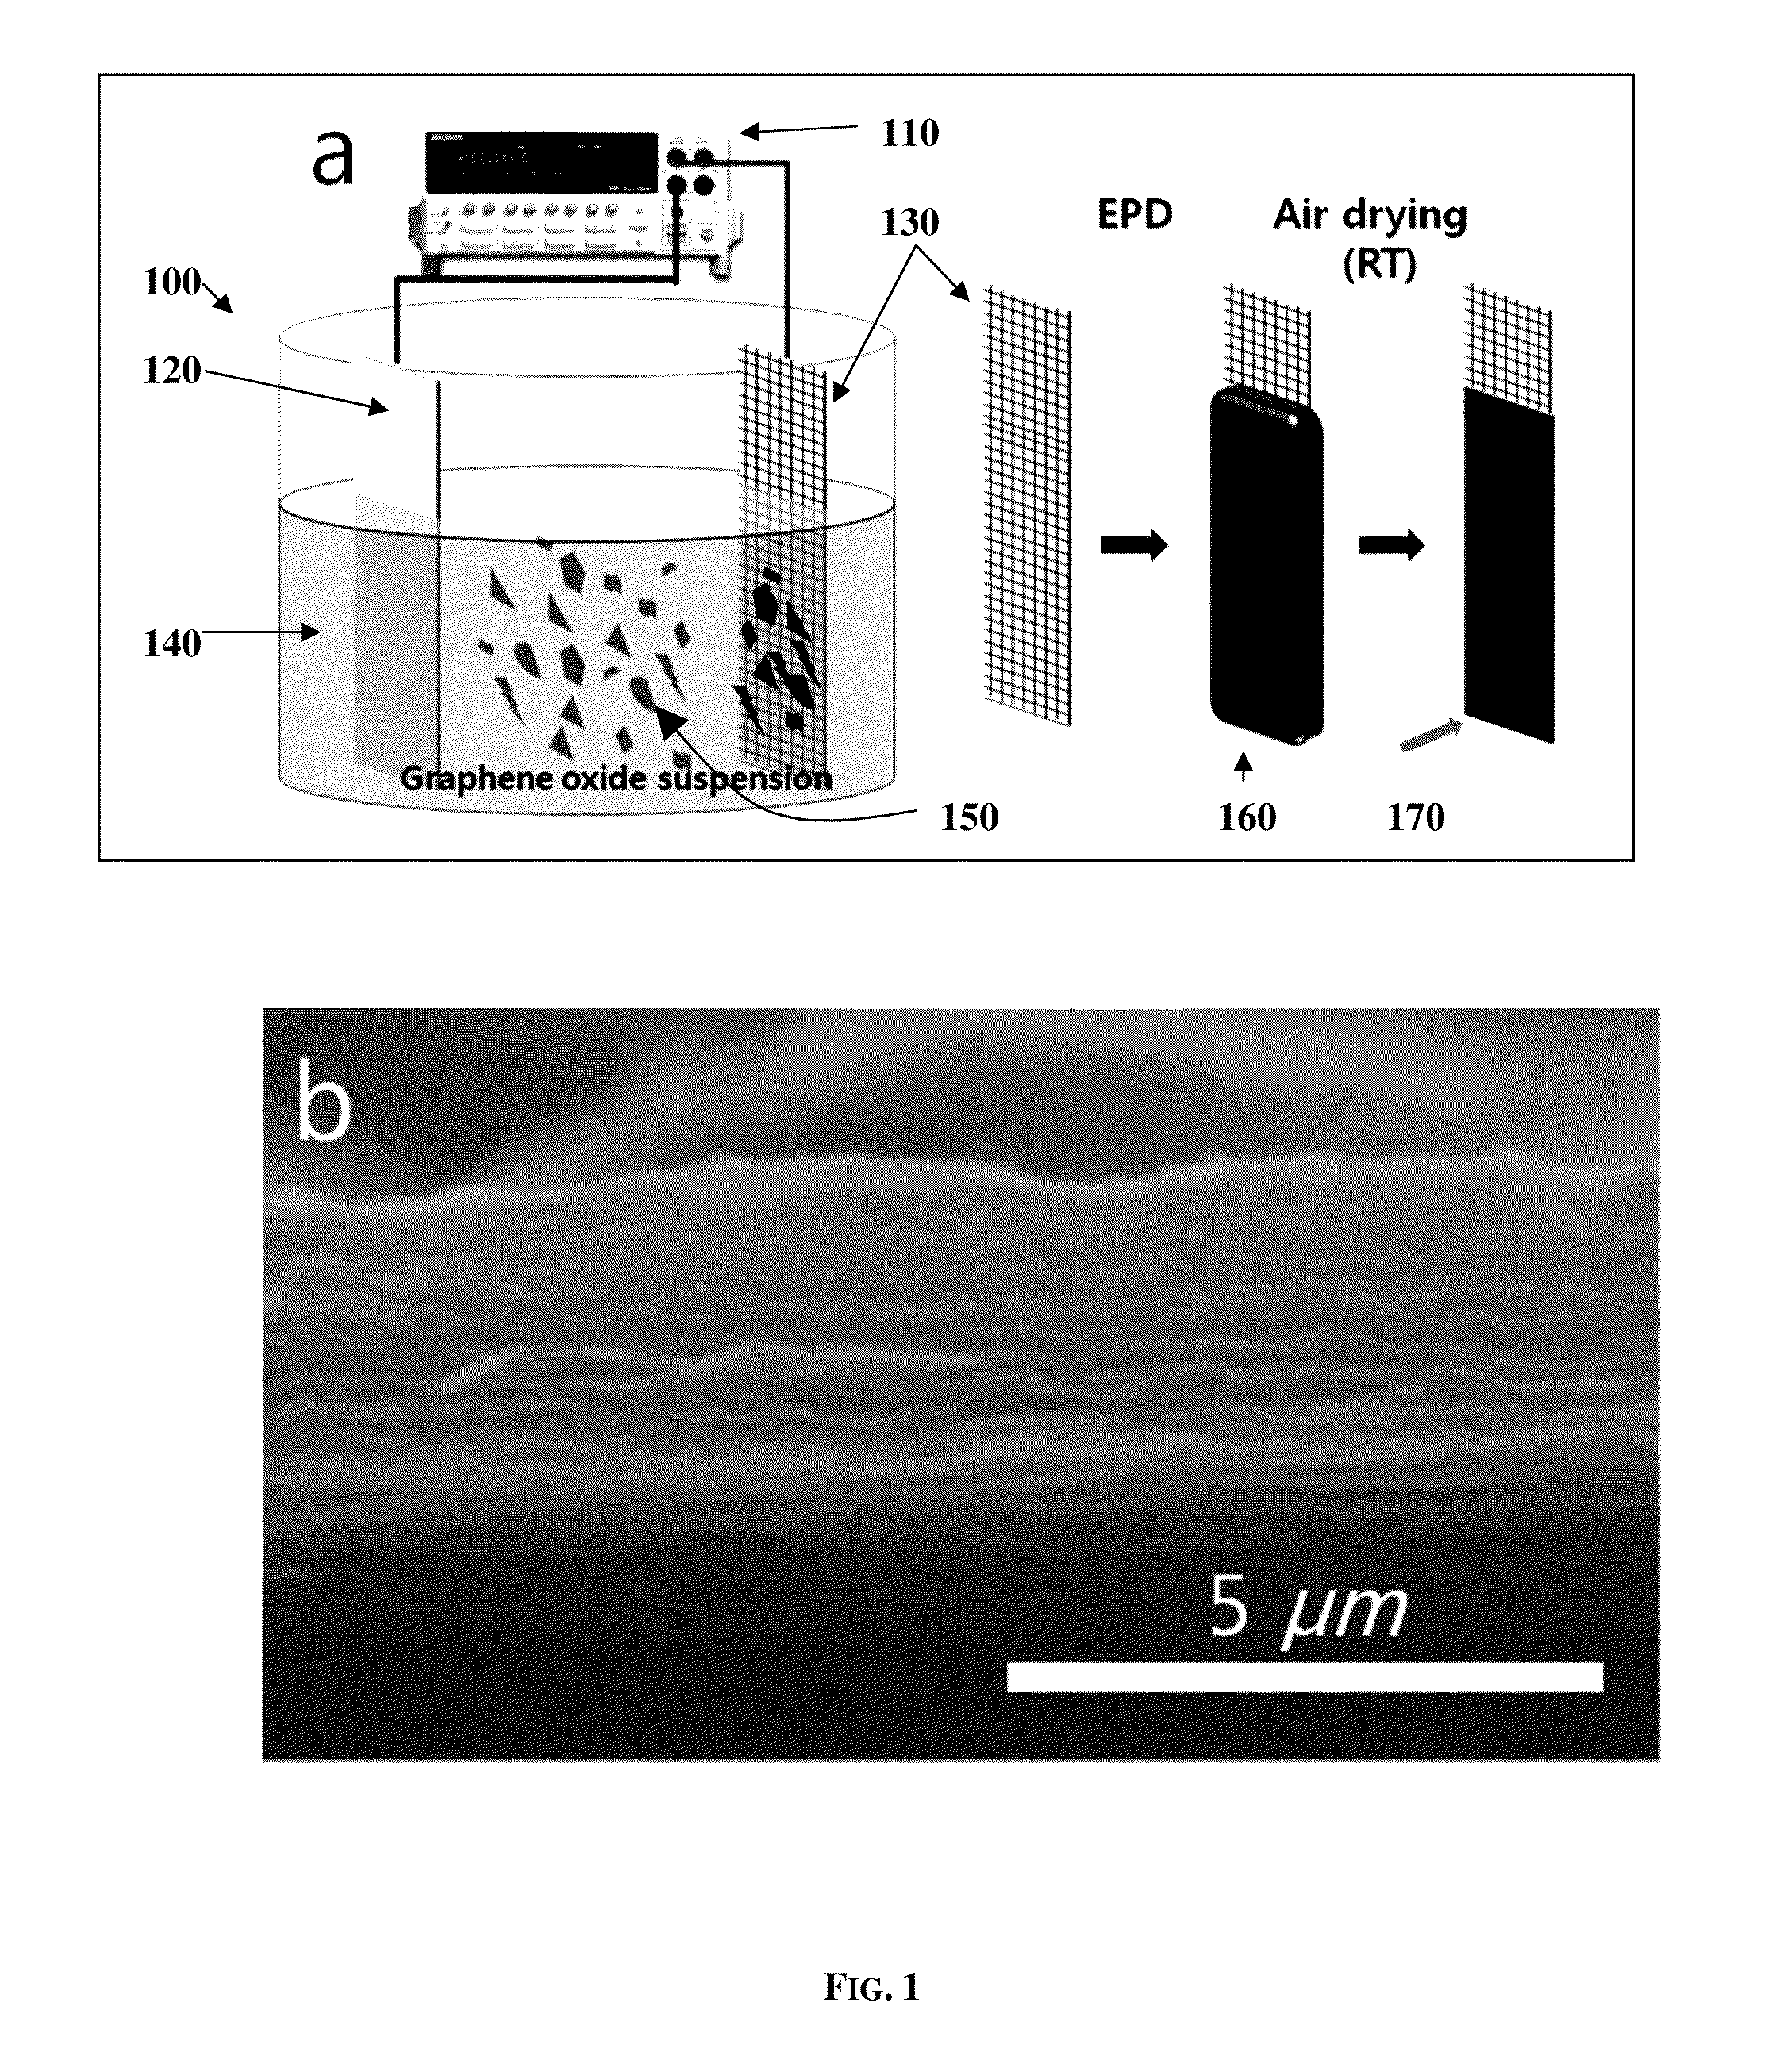 Electrophoretic deposition and reduction of graphene oxide to make graphene film coatings and electrode structures